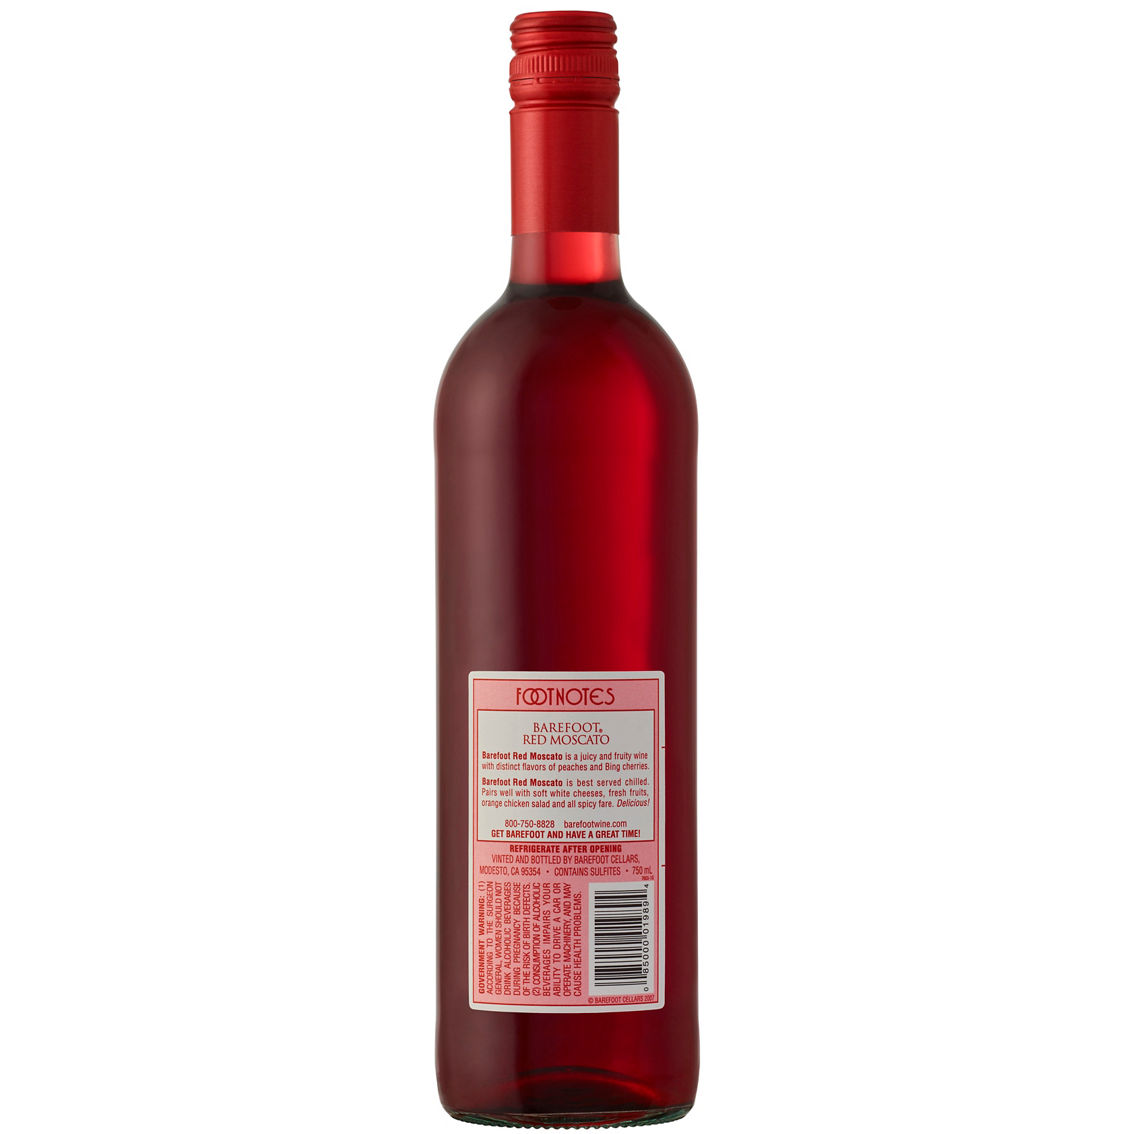 Barefoot Cellars Red Moscato Sweet Red Wine, 750 ml - Image 2 of 2